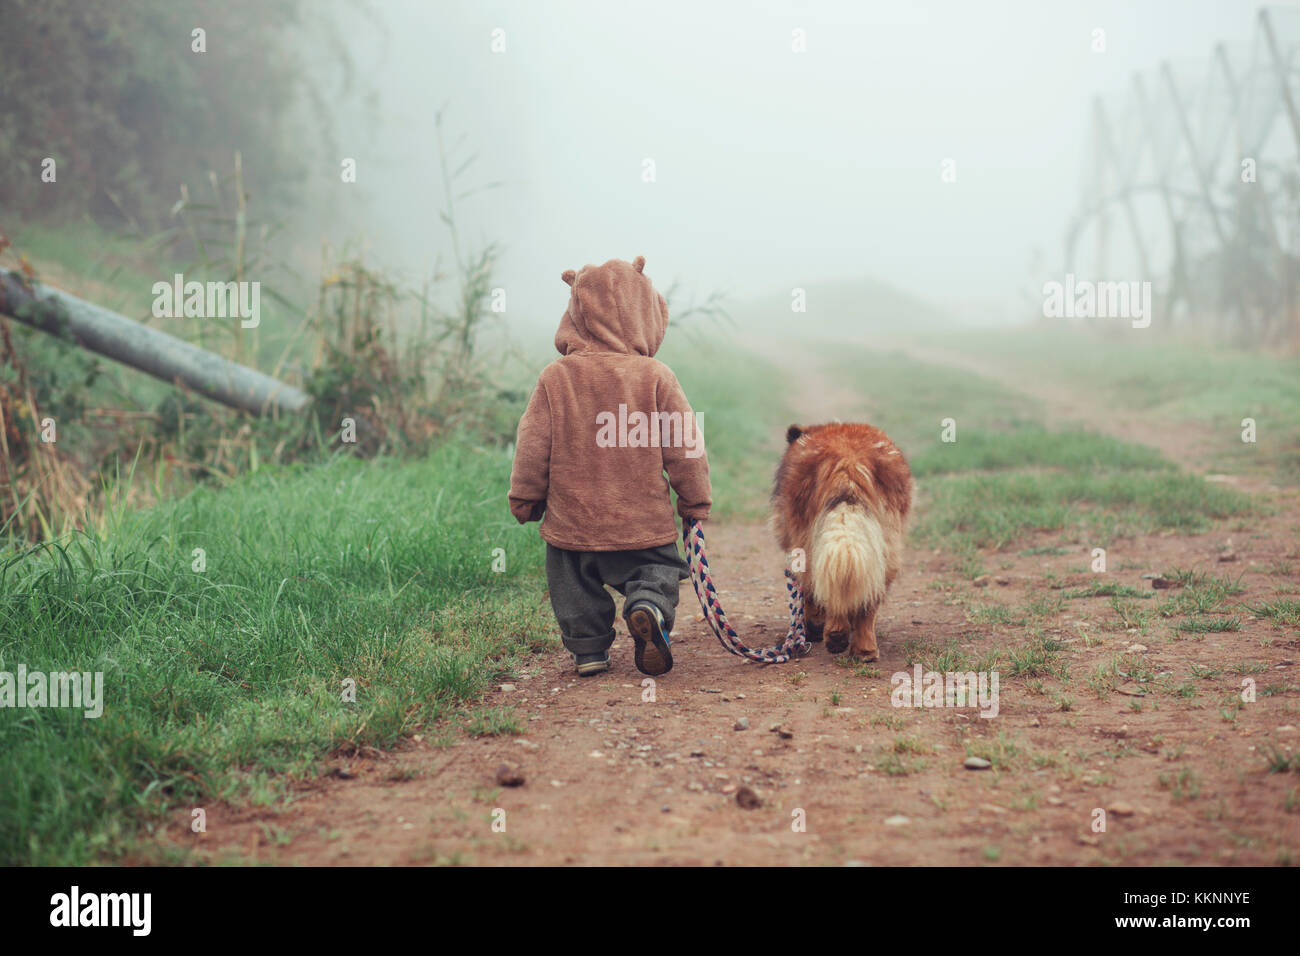 Toddler is walking with dog in the fog Stock Photo